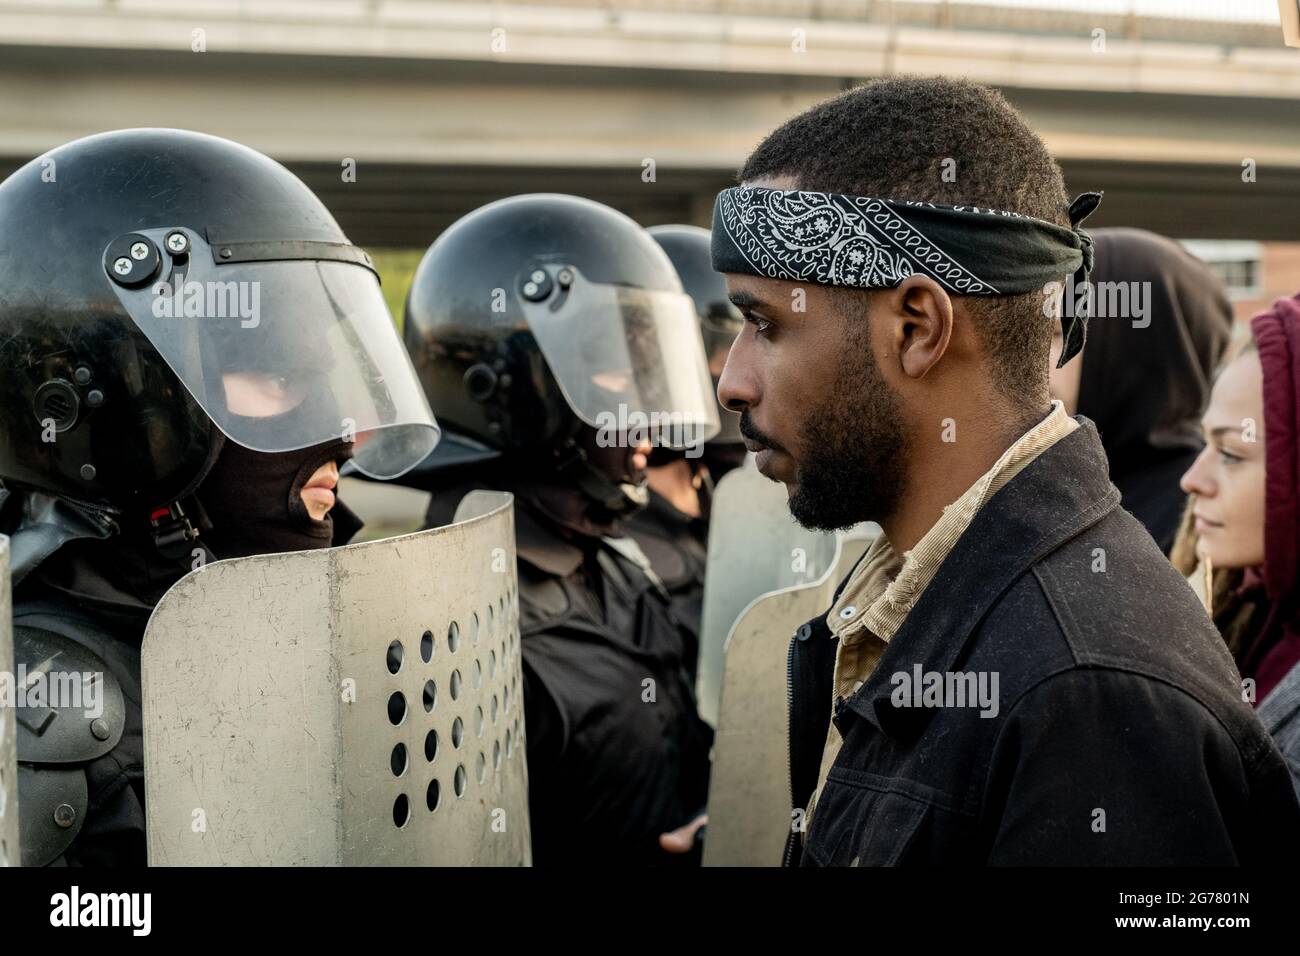 Disgruntled young Black bearded man in bandana standing in front of police officers with riot helmets and shields outdoors Stock Photo